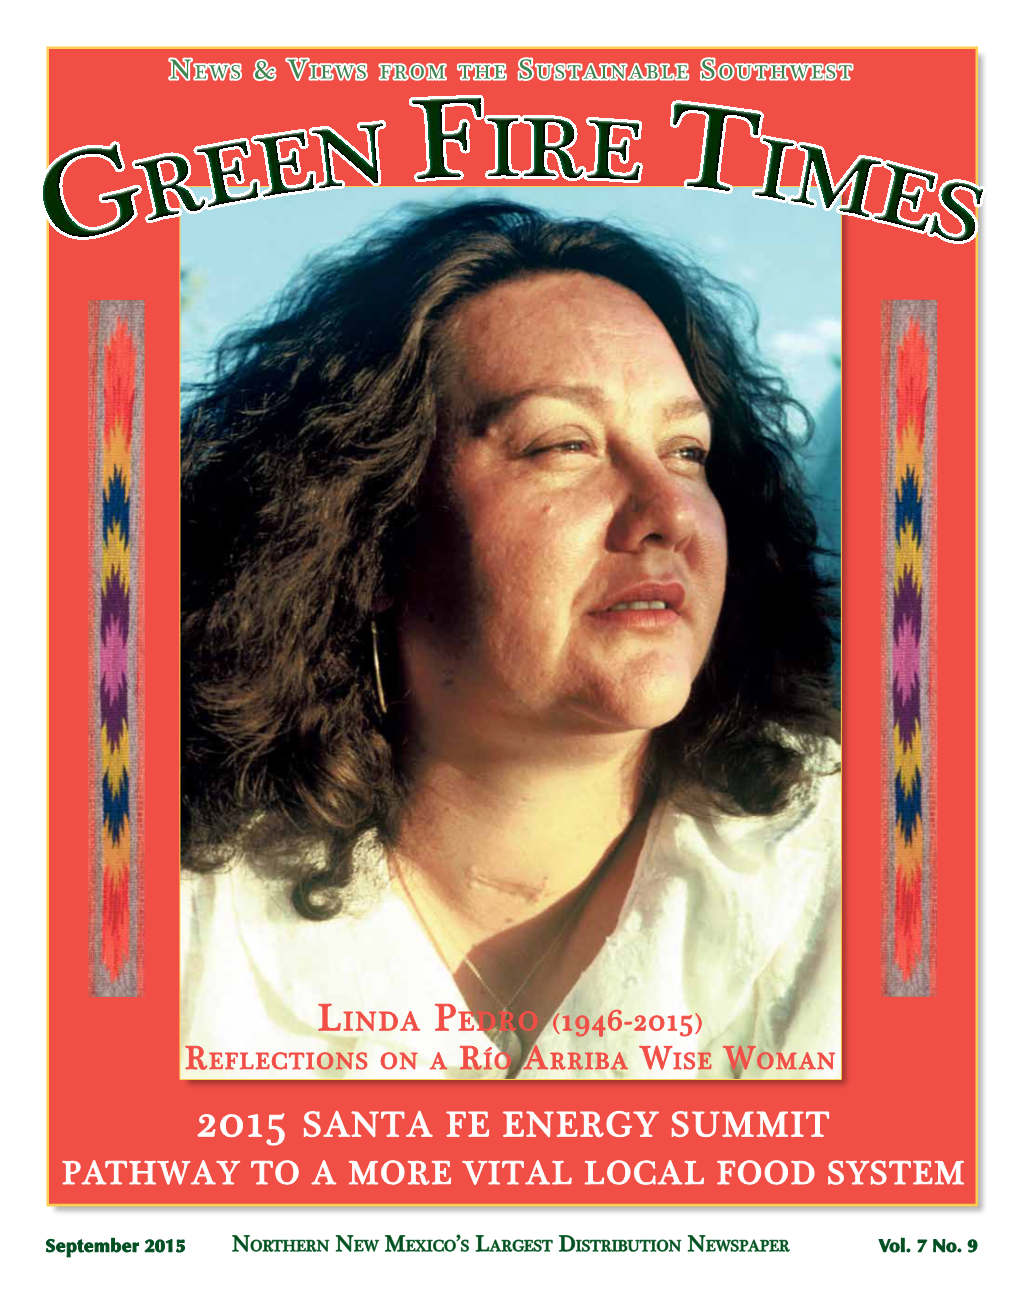 2015 Santa Fe Energy Summit Pathway to a More Vital Local Food System